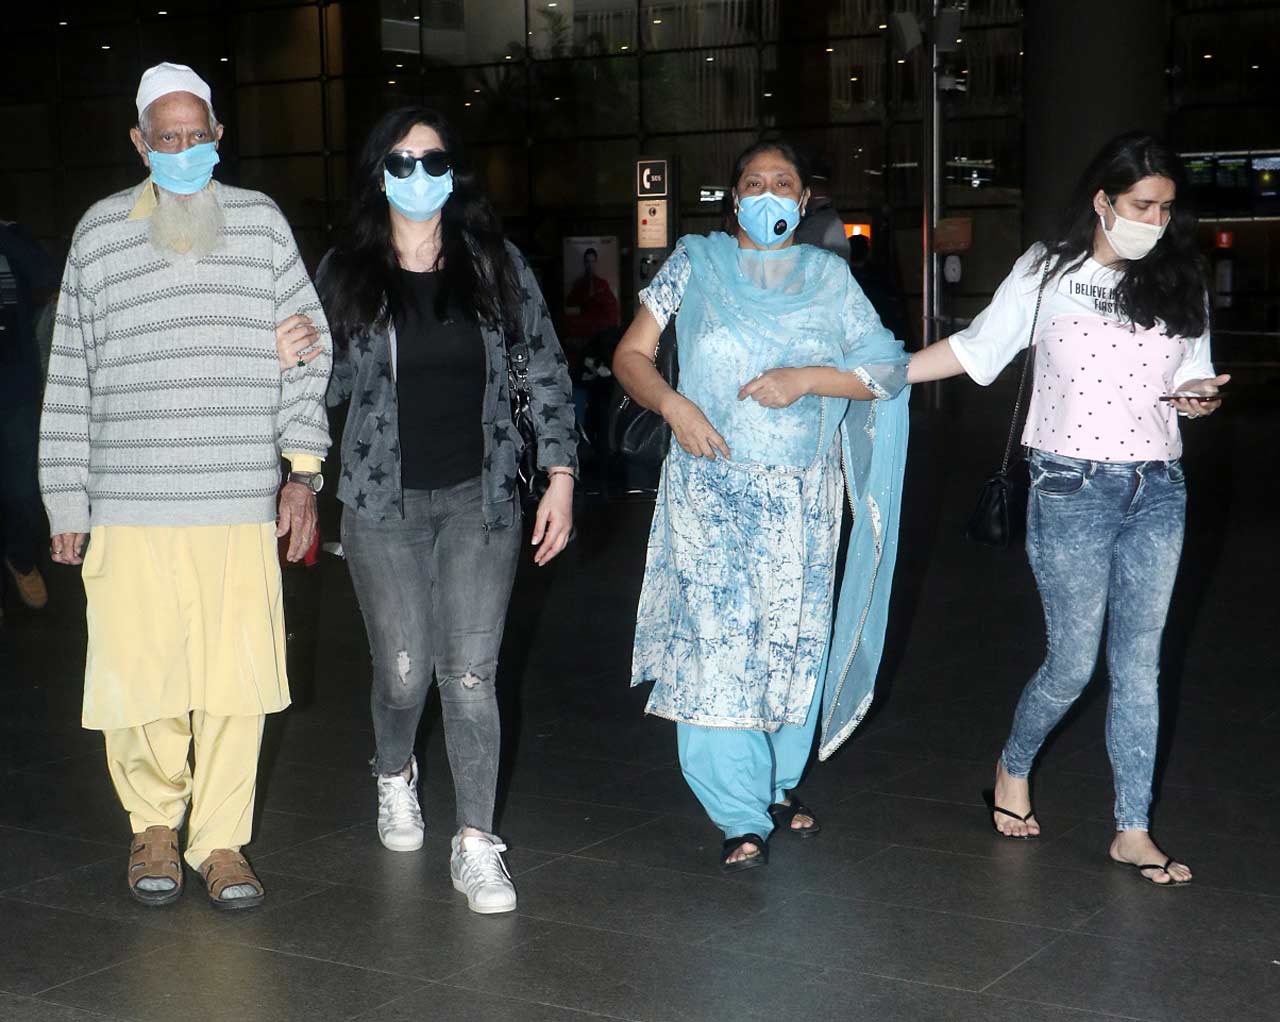 Zareen Khan posed with her entire family when clicked by the shutterbugs at the Mumbai airport.